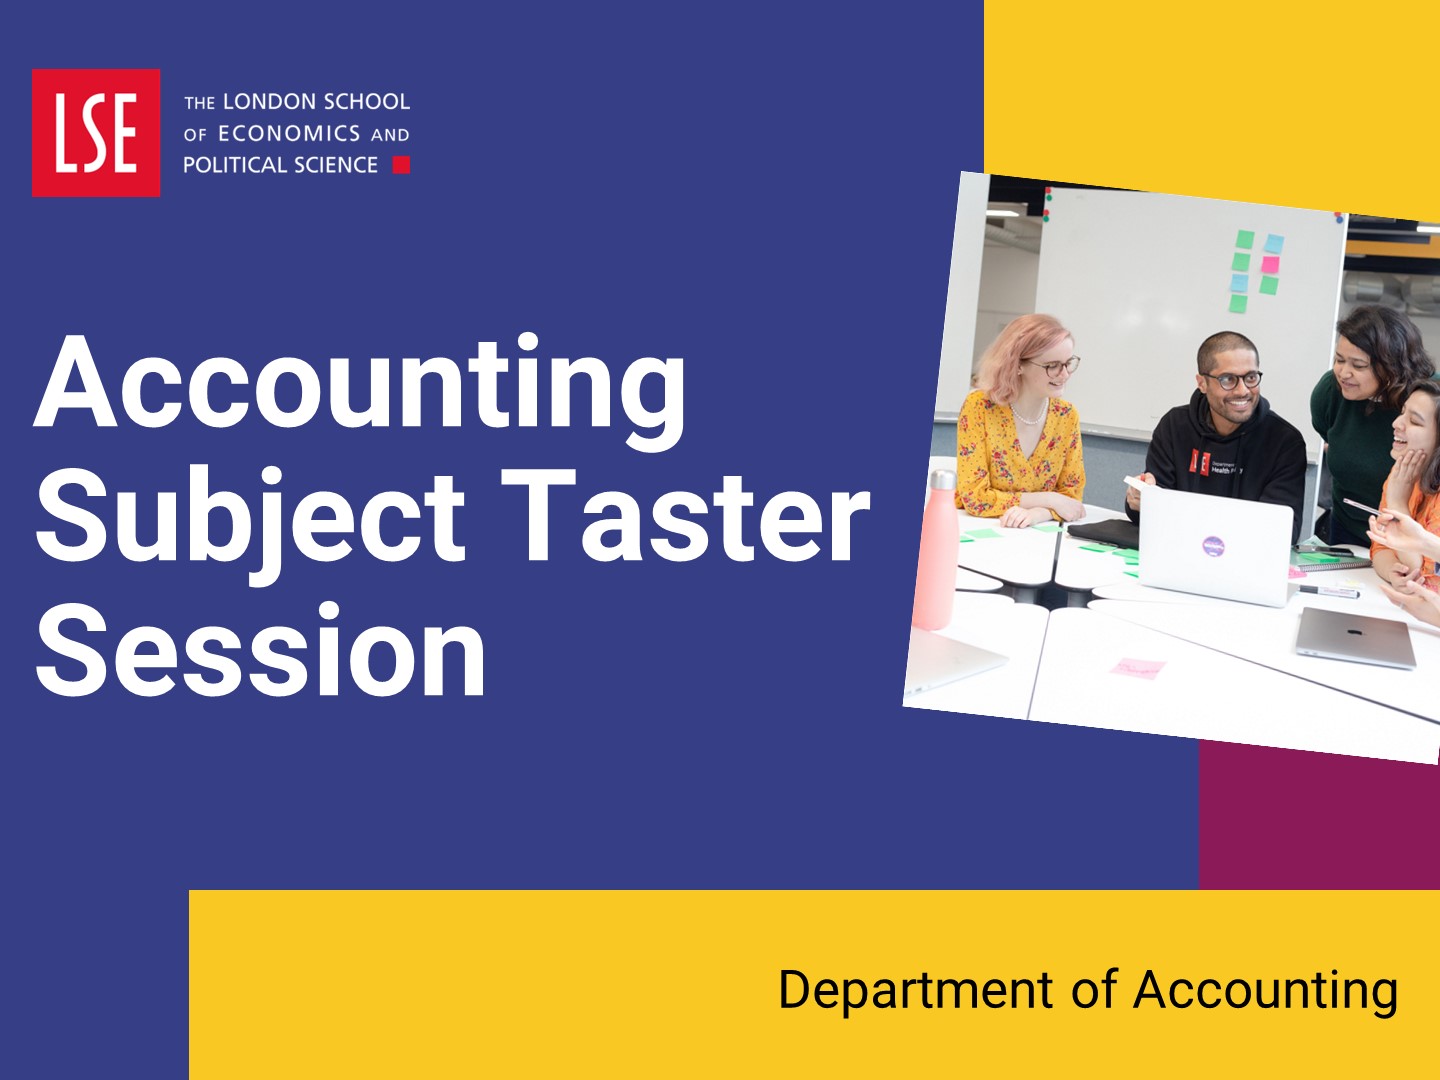 Listen to our taster lecture to learn more about studying Accounting & Finance at LSE.